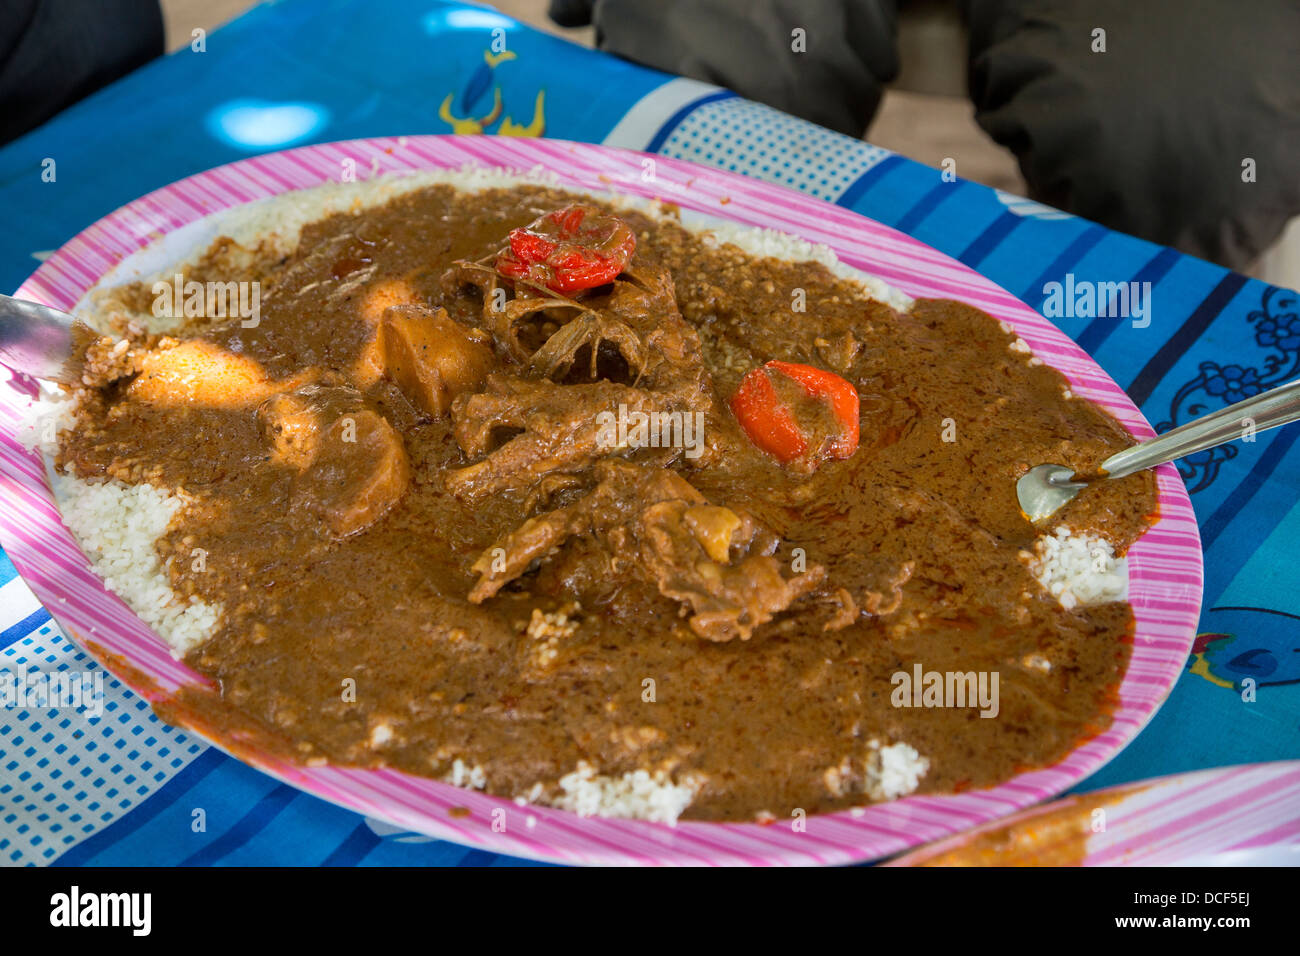 Cashew Nut Stew with Chicken, Peppers, and Rice. People around the table eat from a common dish.  The Gambia. Stock Photo